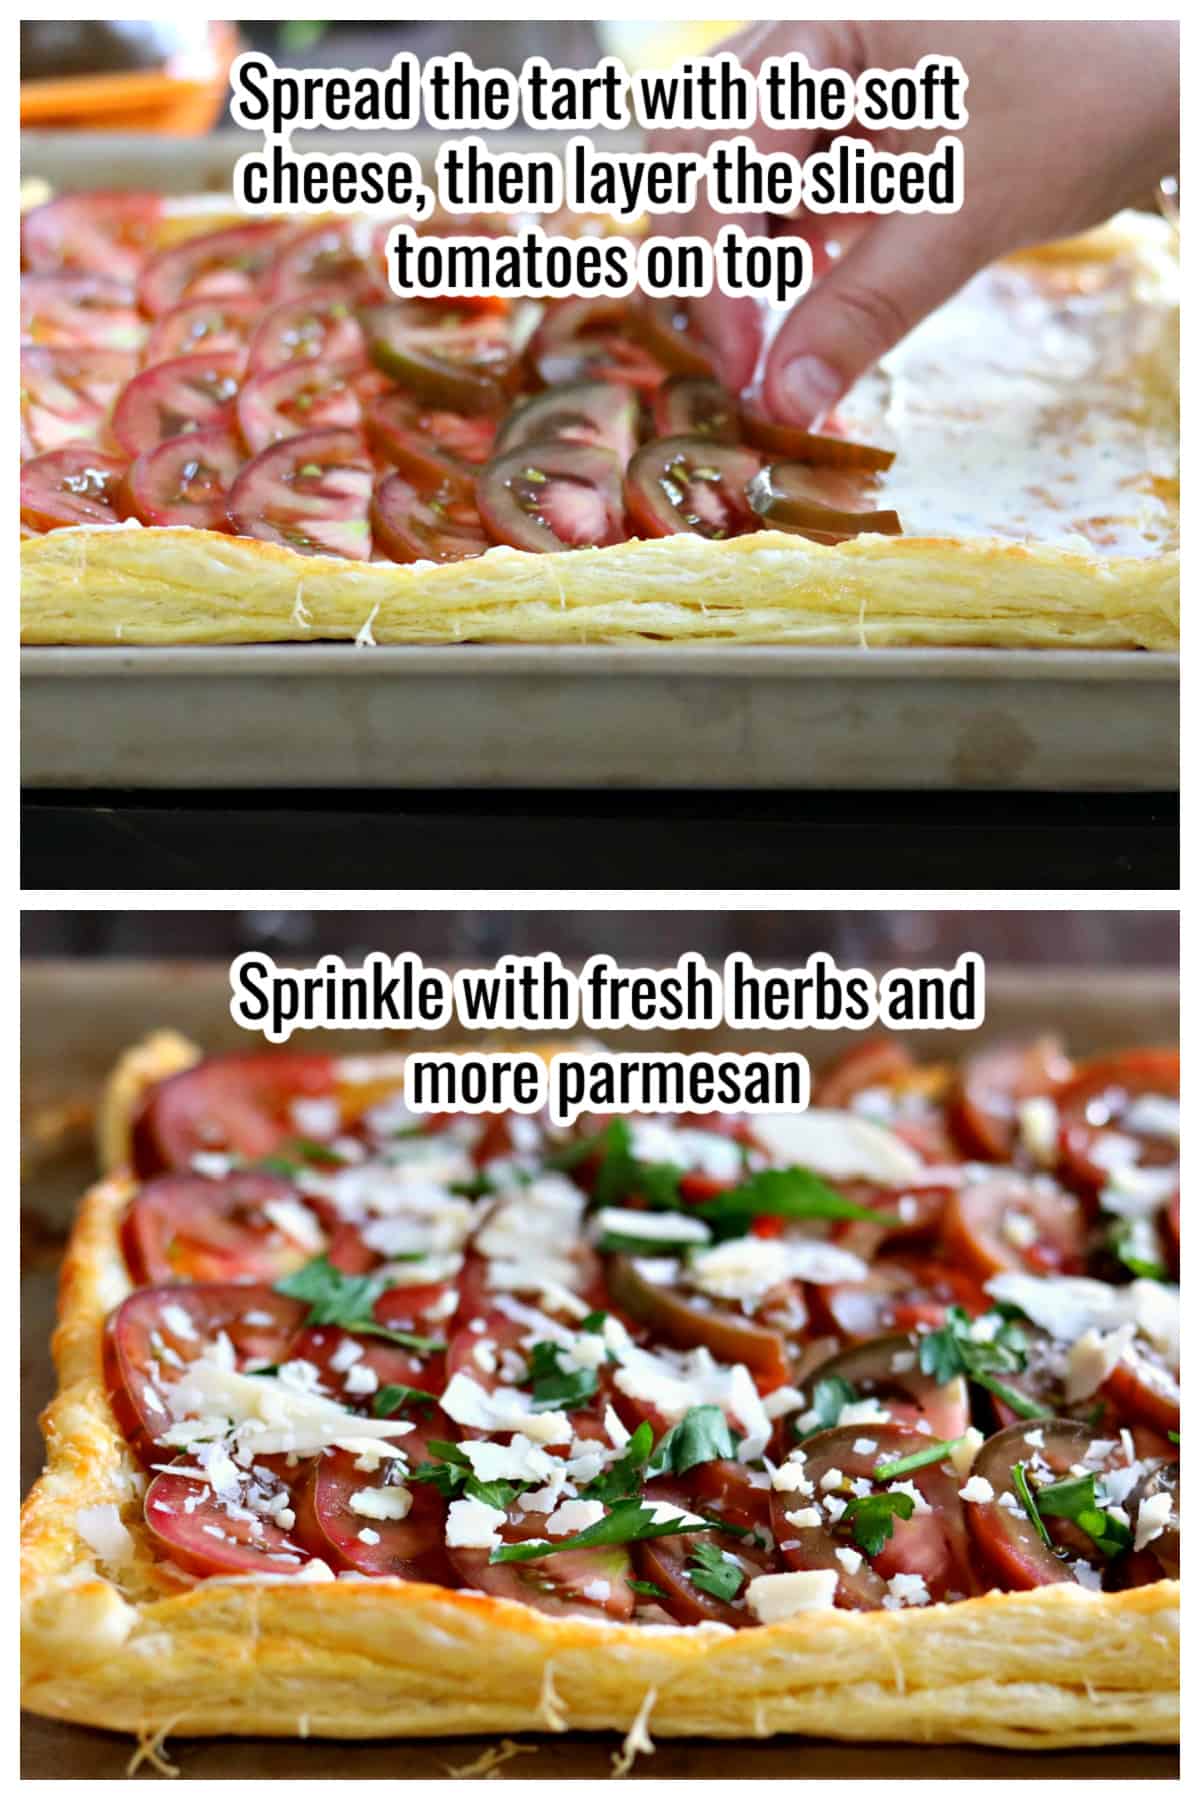 Collage showing placing tomatoes on a puff pastry base, then sprinkling with herbs and parmesan.